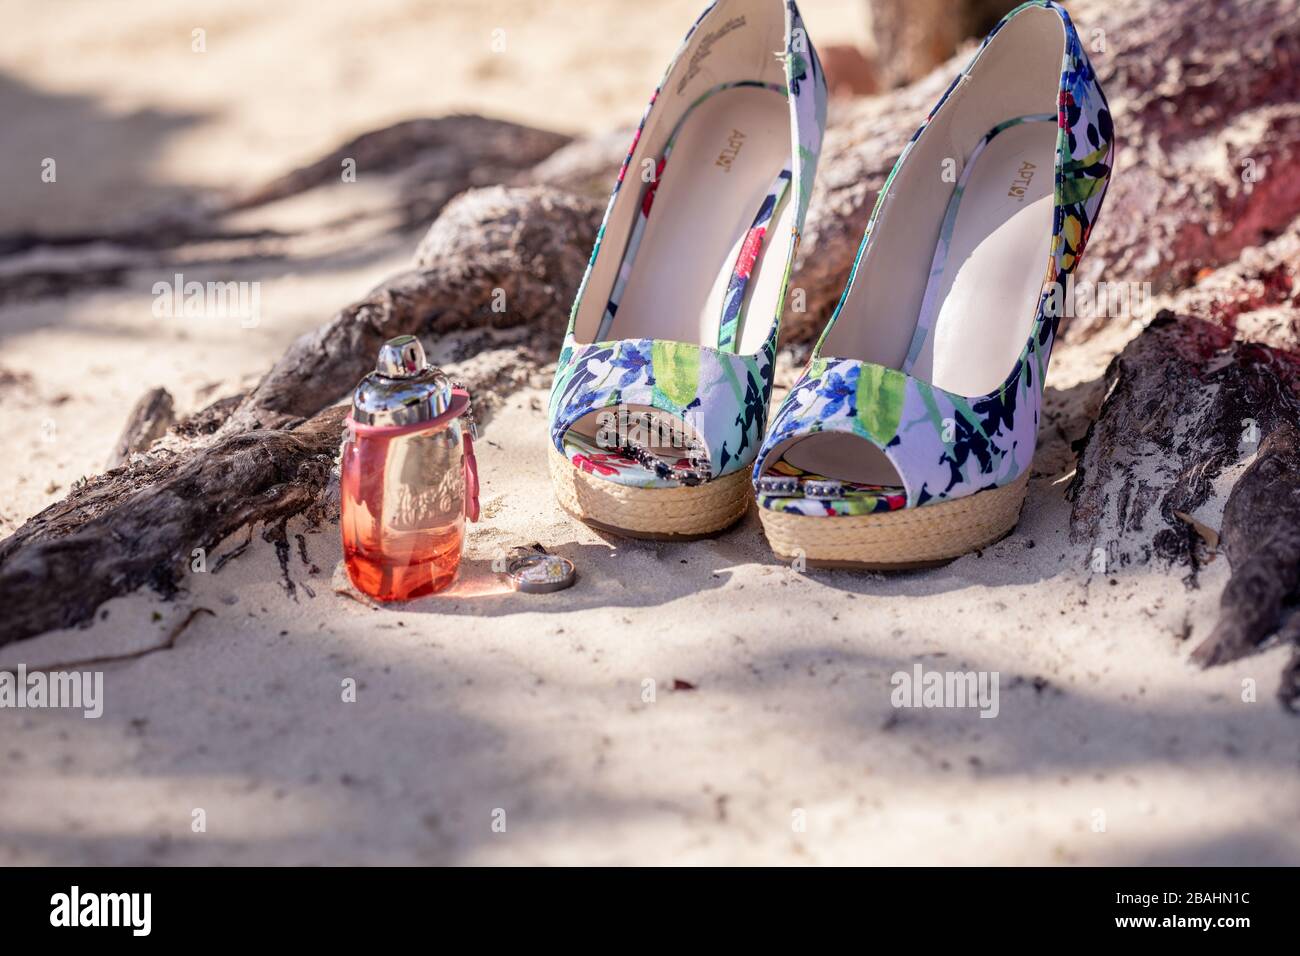 Wedding item splay at an exotic resort in Jamaica, including perfume, shoes, and wedding bands Stock Photo